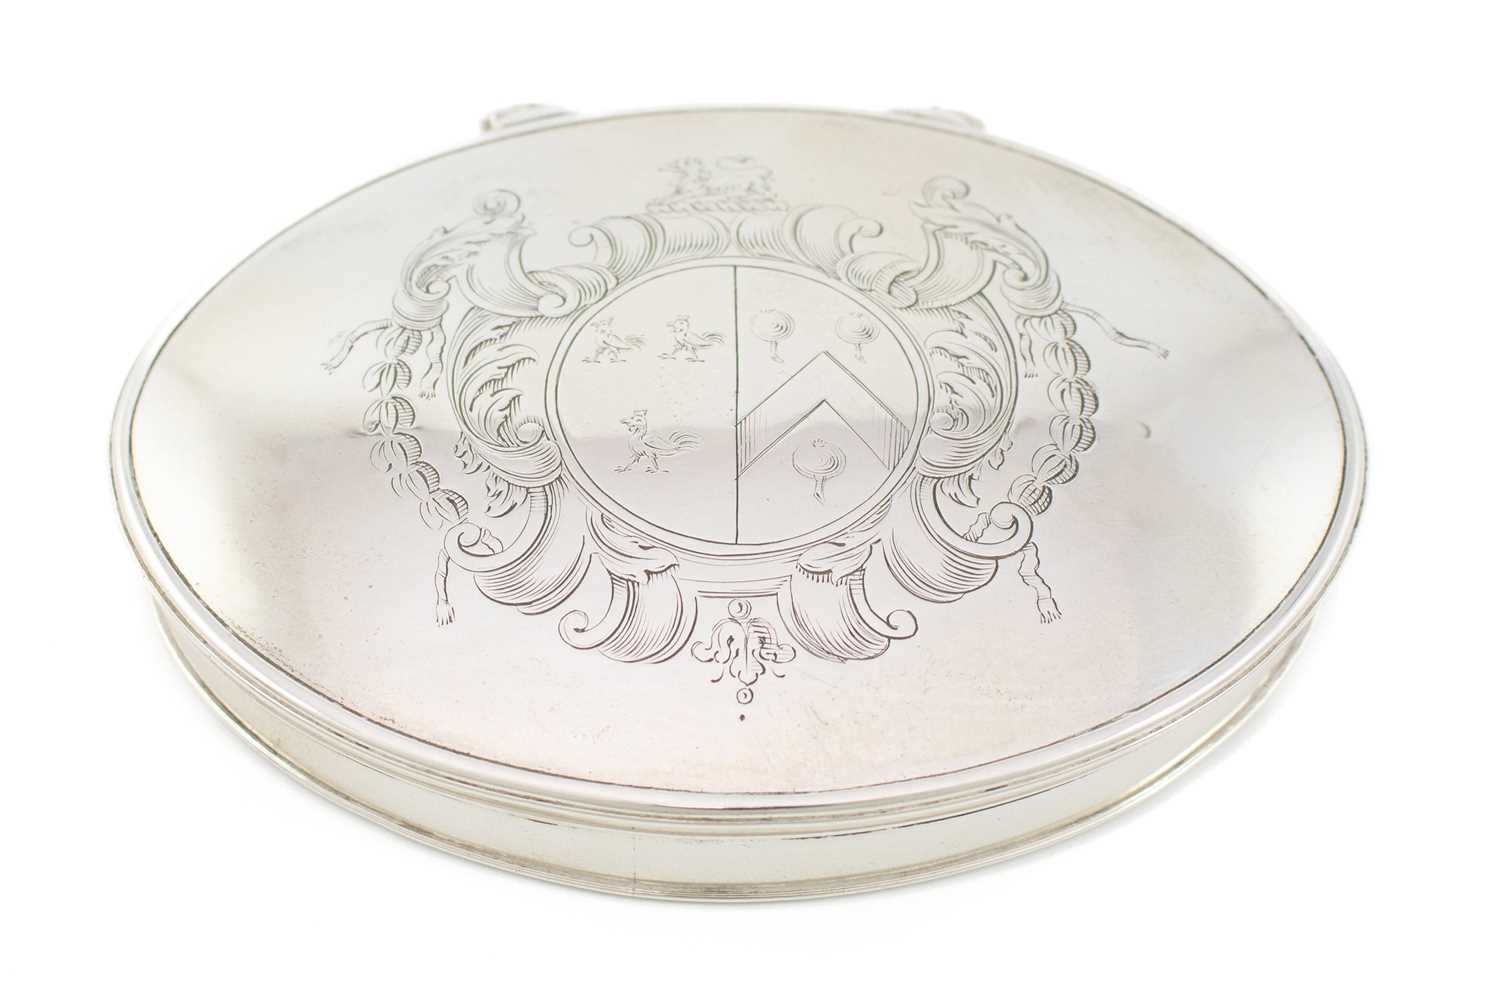 An early-18th century silver snuff box, unmarked, circa 1730, oval form, the hinged cover engraved